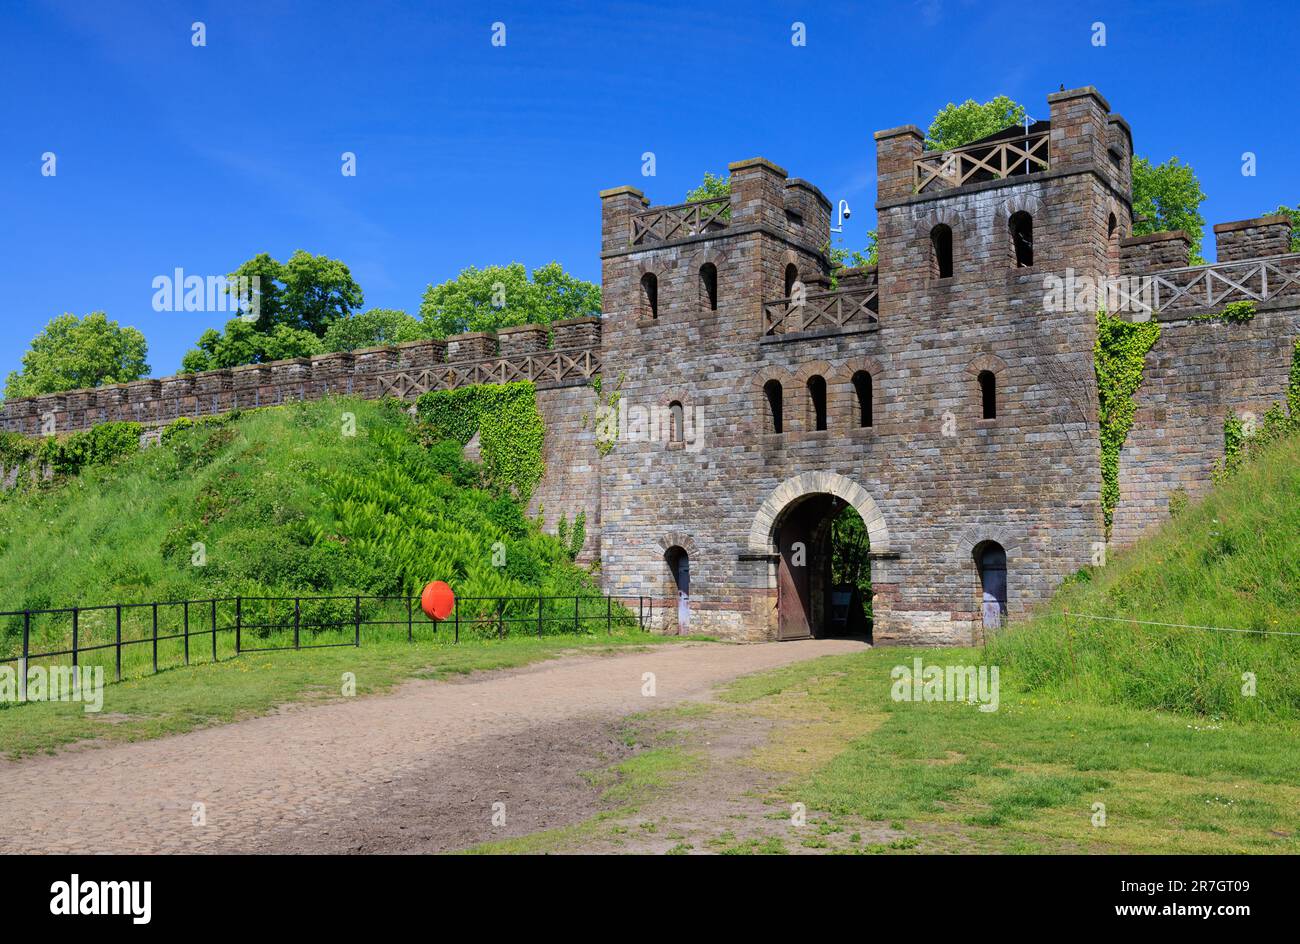 Cardiff Castle North Gate, Cardiff, South Wales, UK Stock Photo